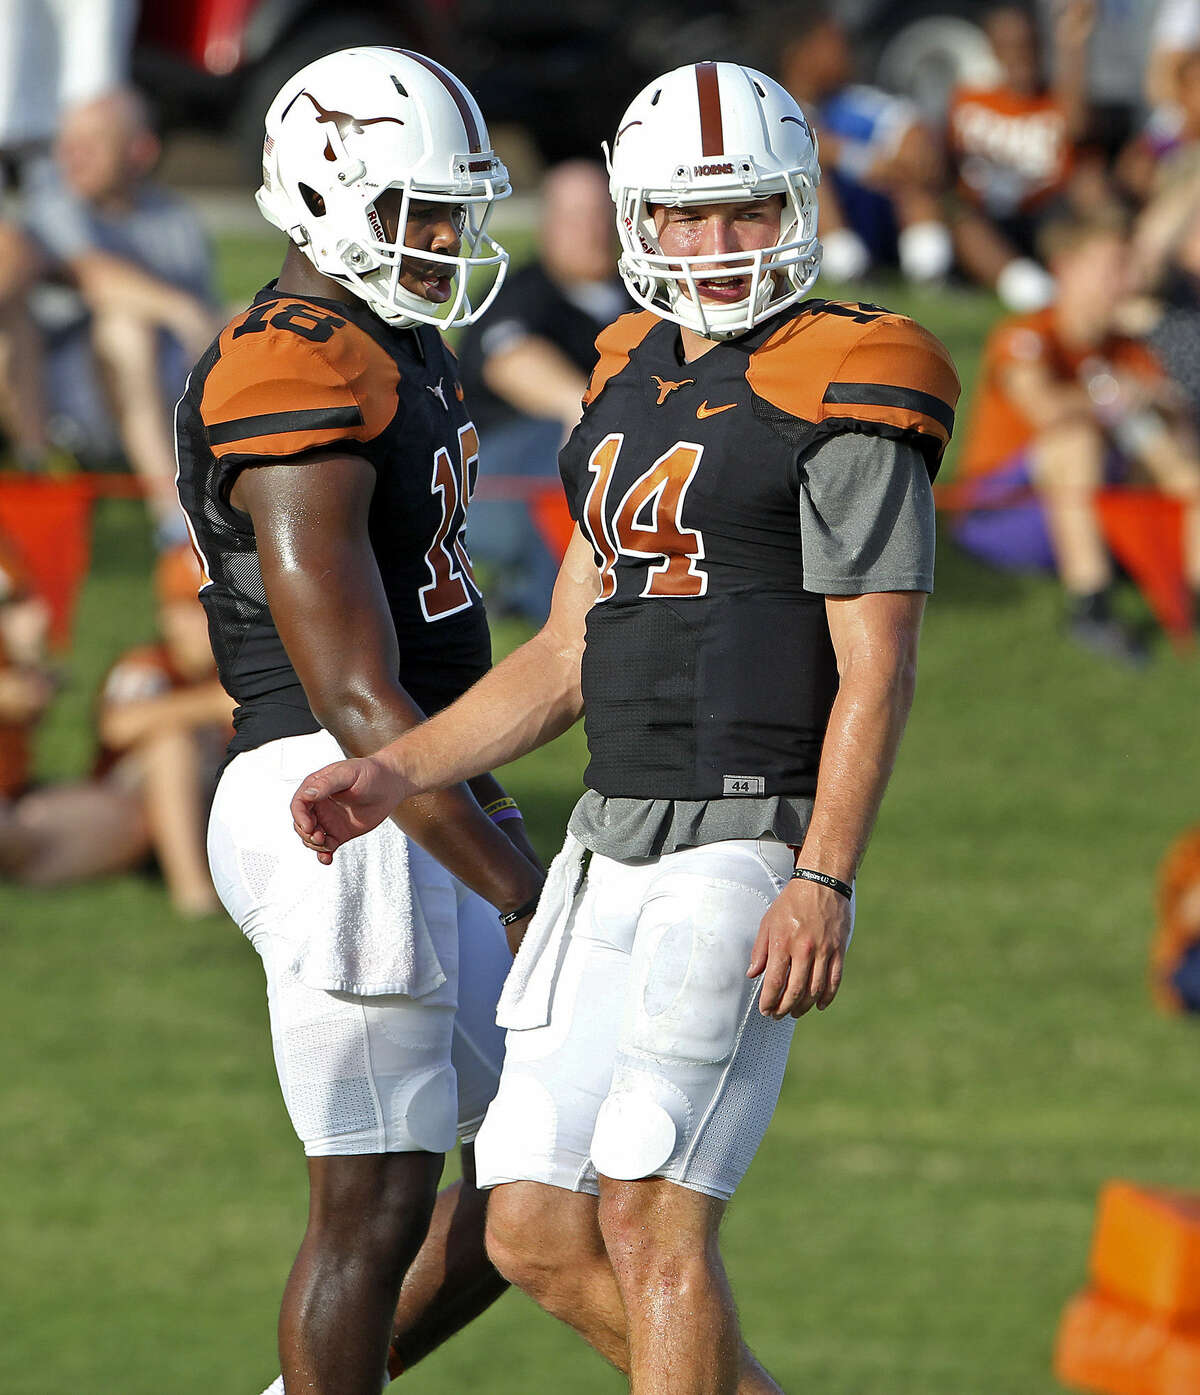 David Ash (right) has been injured most of the season, forcing freshman Tyrone Swoopes into action.